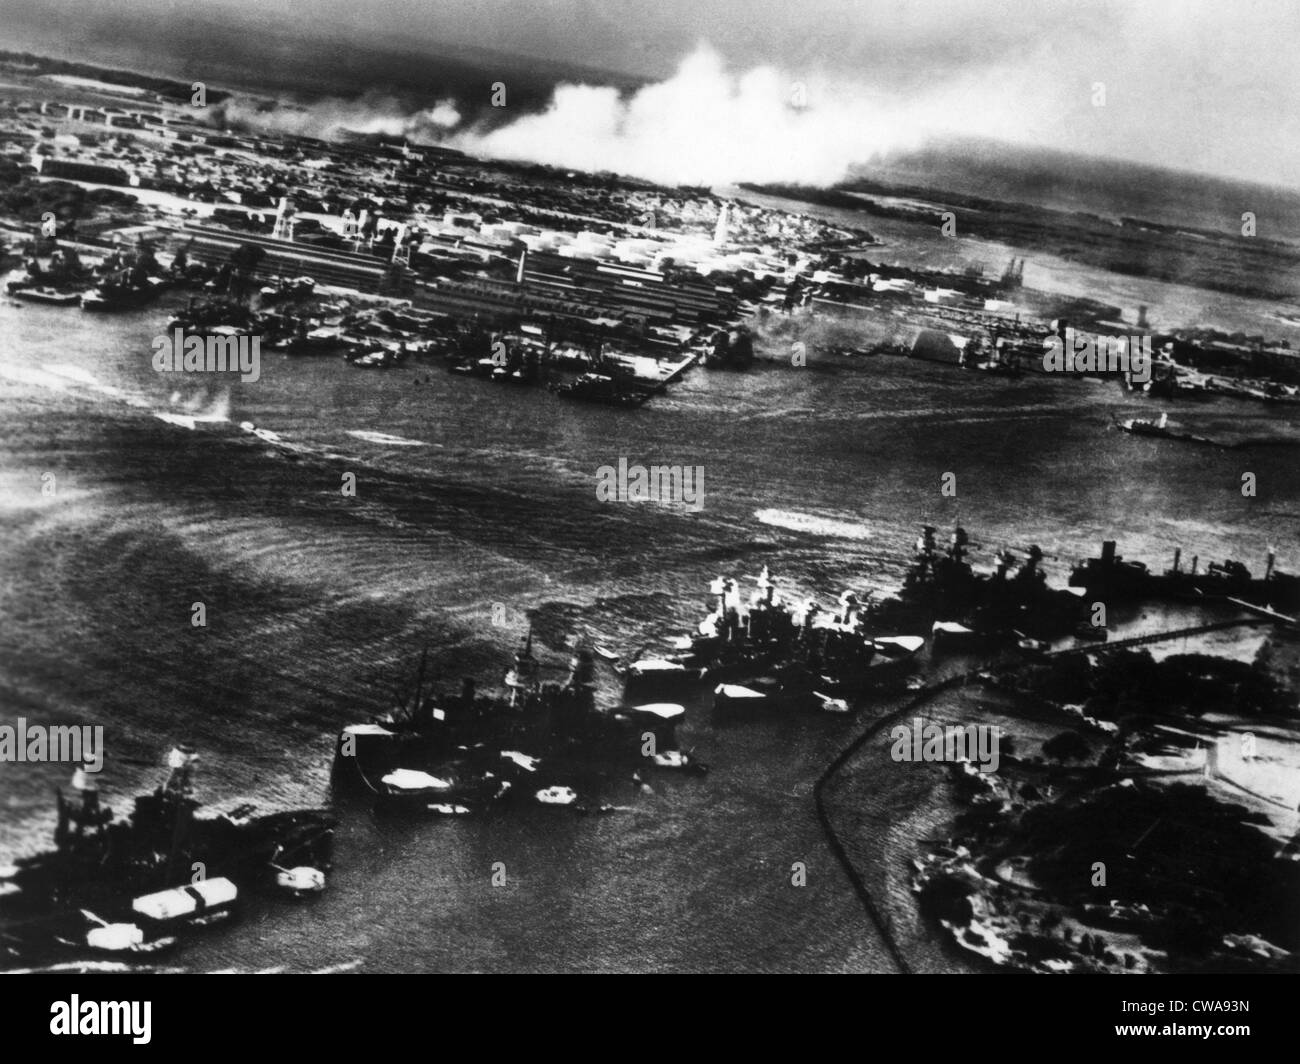 The Japanese attack on Pearl Harbor, as seen from the view of the Japanese, December 7, 1941. Courtesy: CSU Archives/Everett Stock Photo